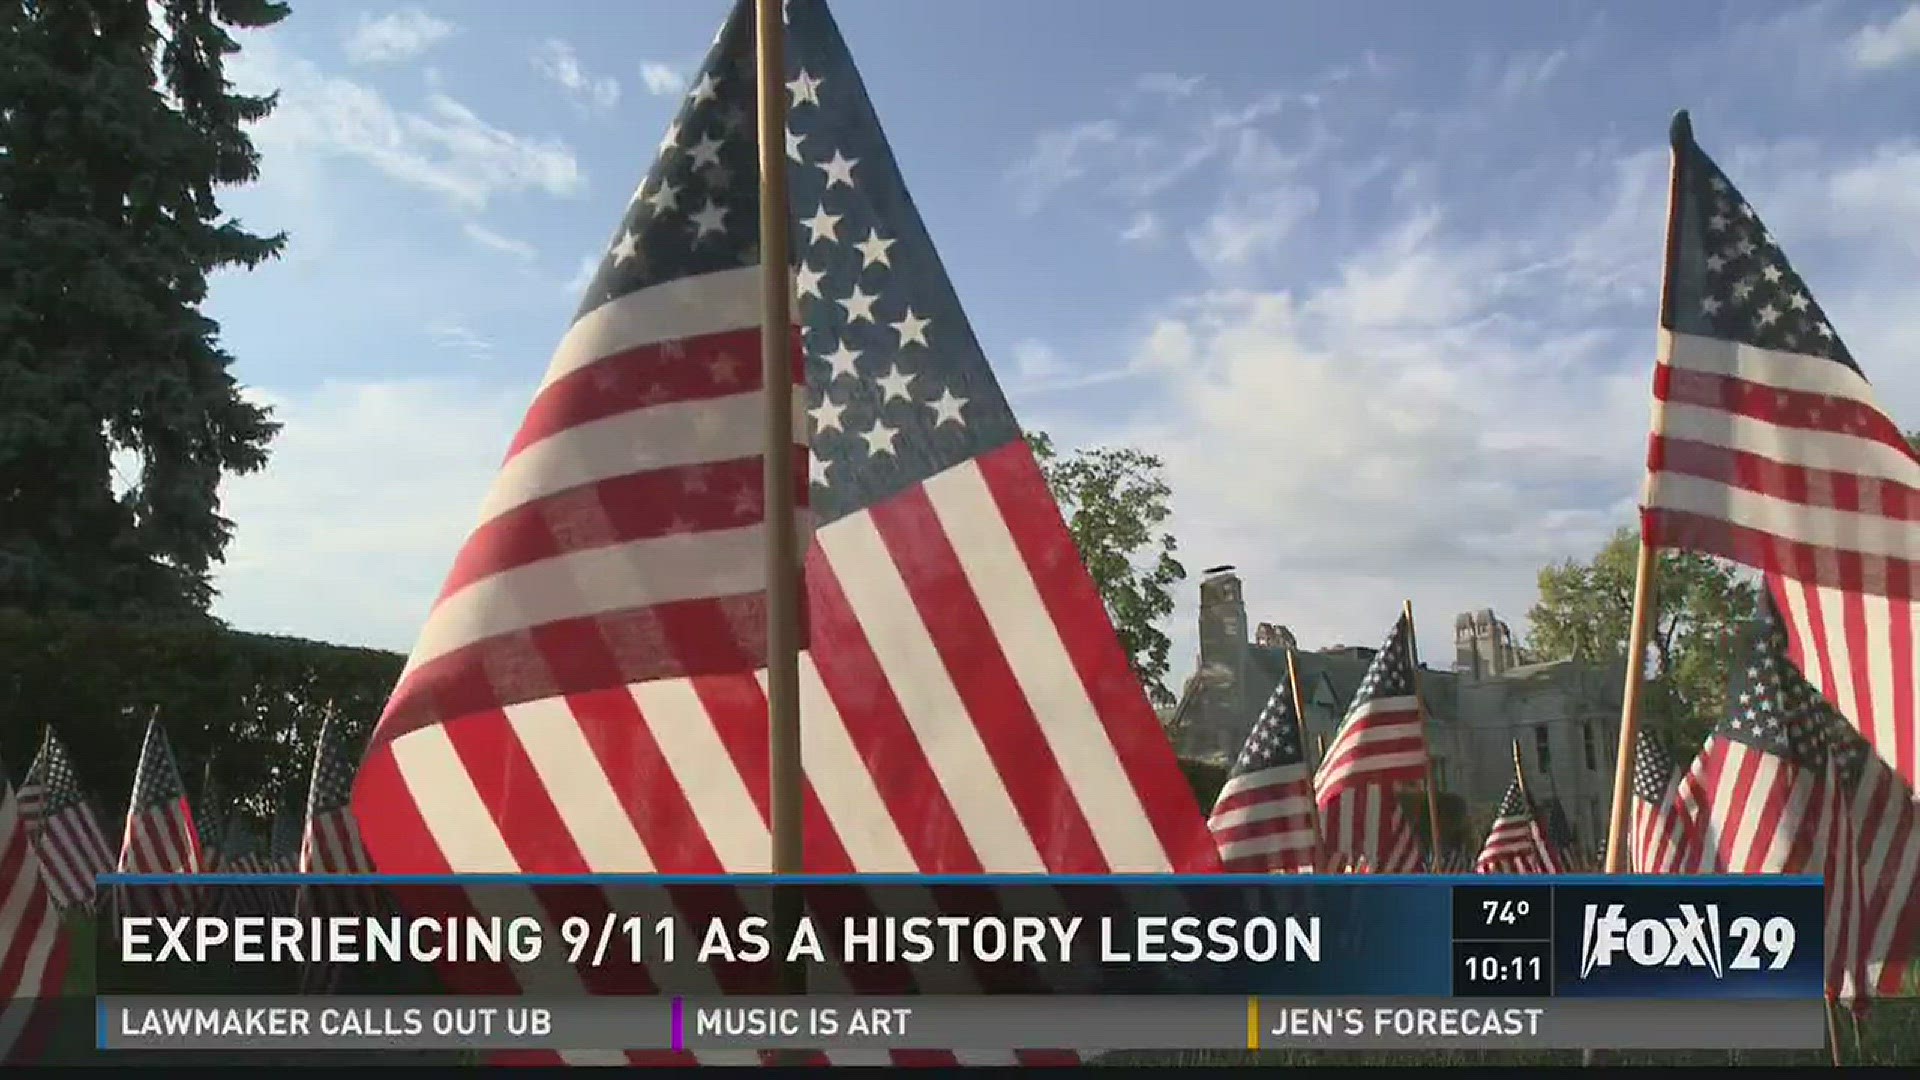 9/11 as a history lesson